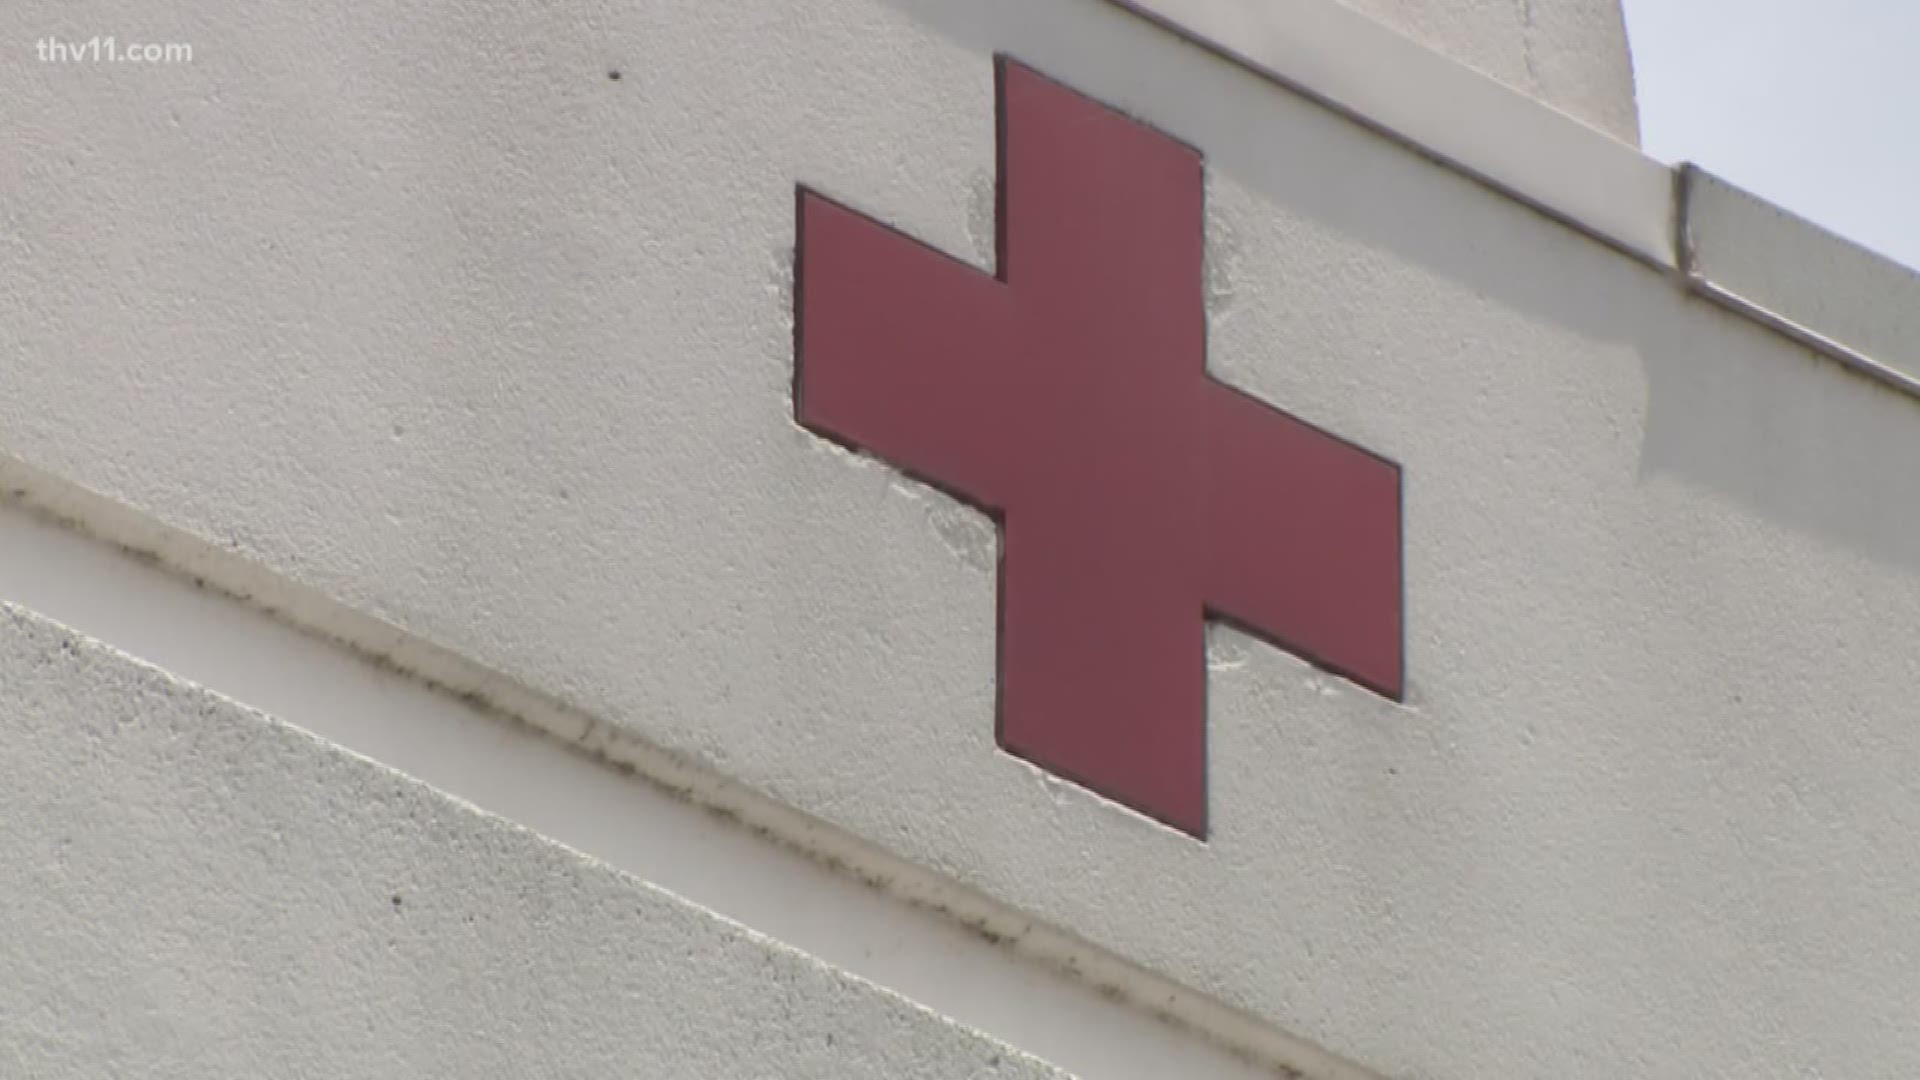 The Red Cross is ready to help anyone affected by flooding in Arkansas.